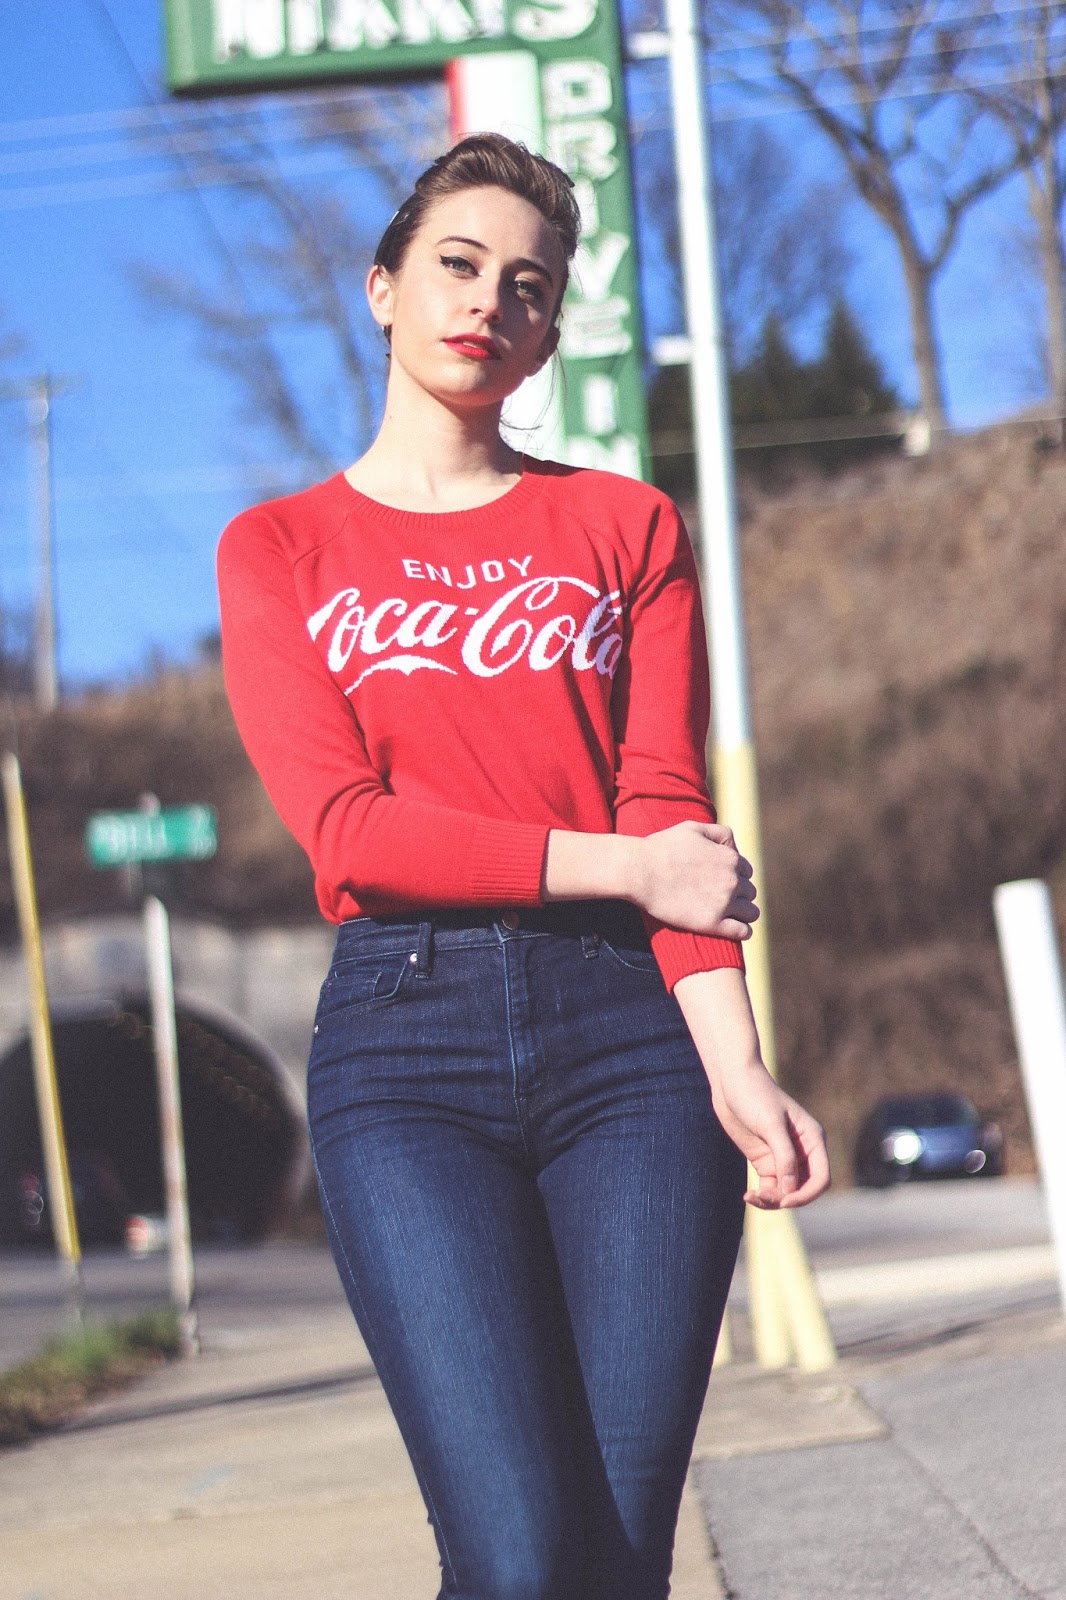 50's style, retro, coca cola, vintage outfit, gap high waist jeans, socks and heel, bandana, 50's style hair, drive in, fashion blogger